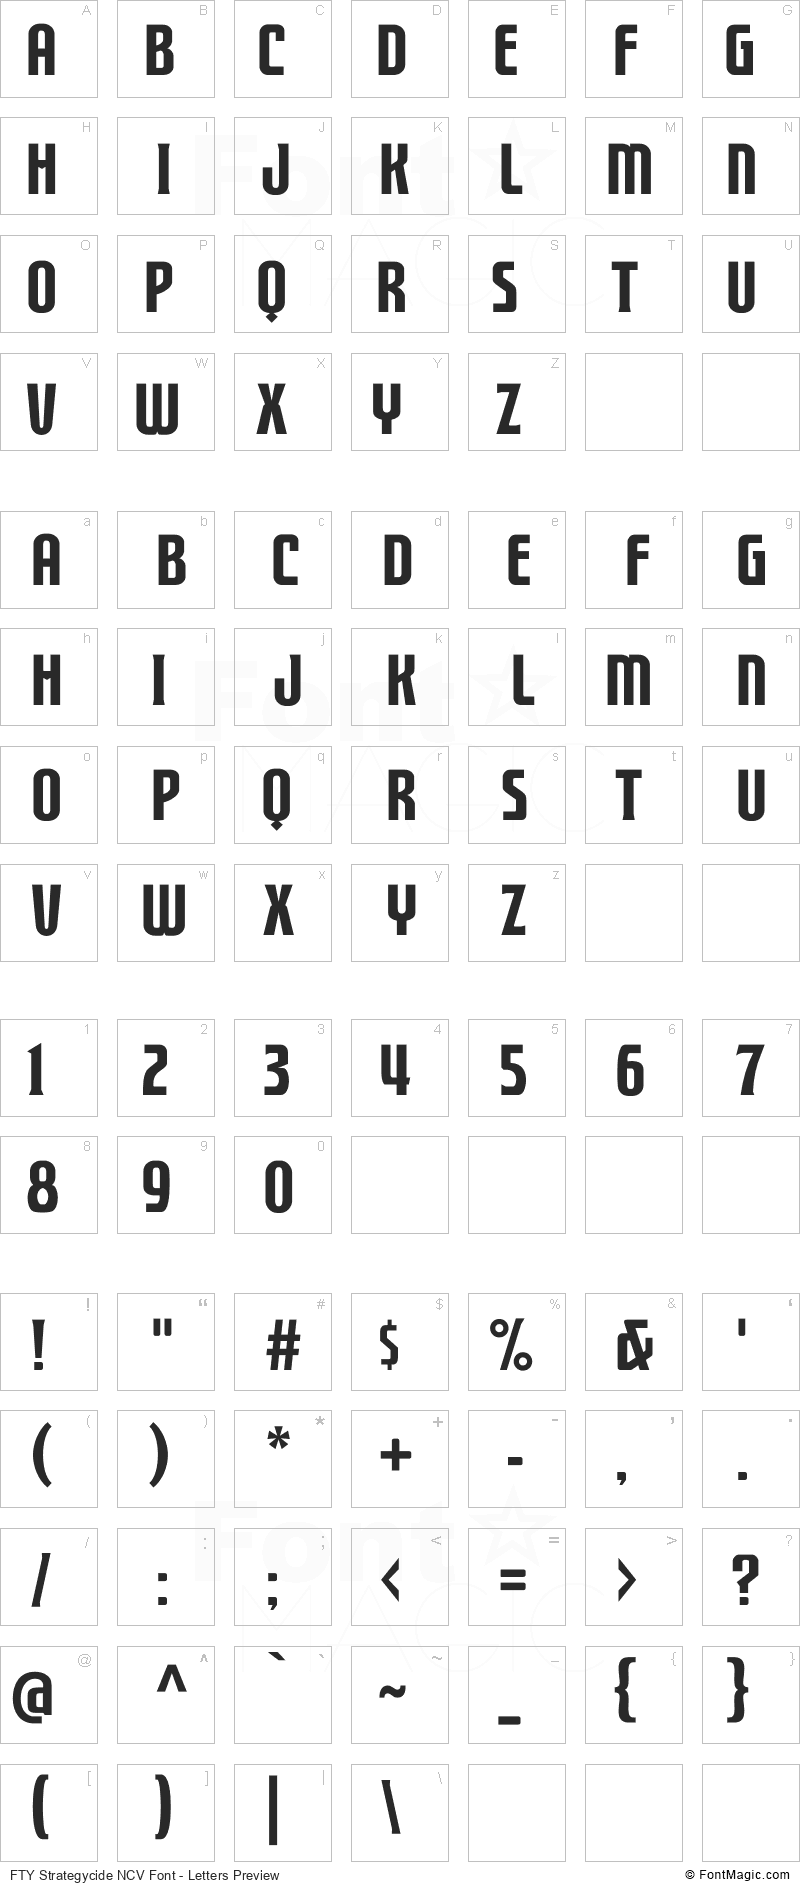 FTY Strategycide NCV Font - All Latters Preview Chart